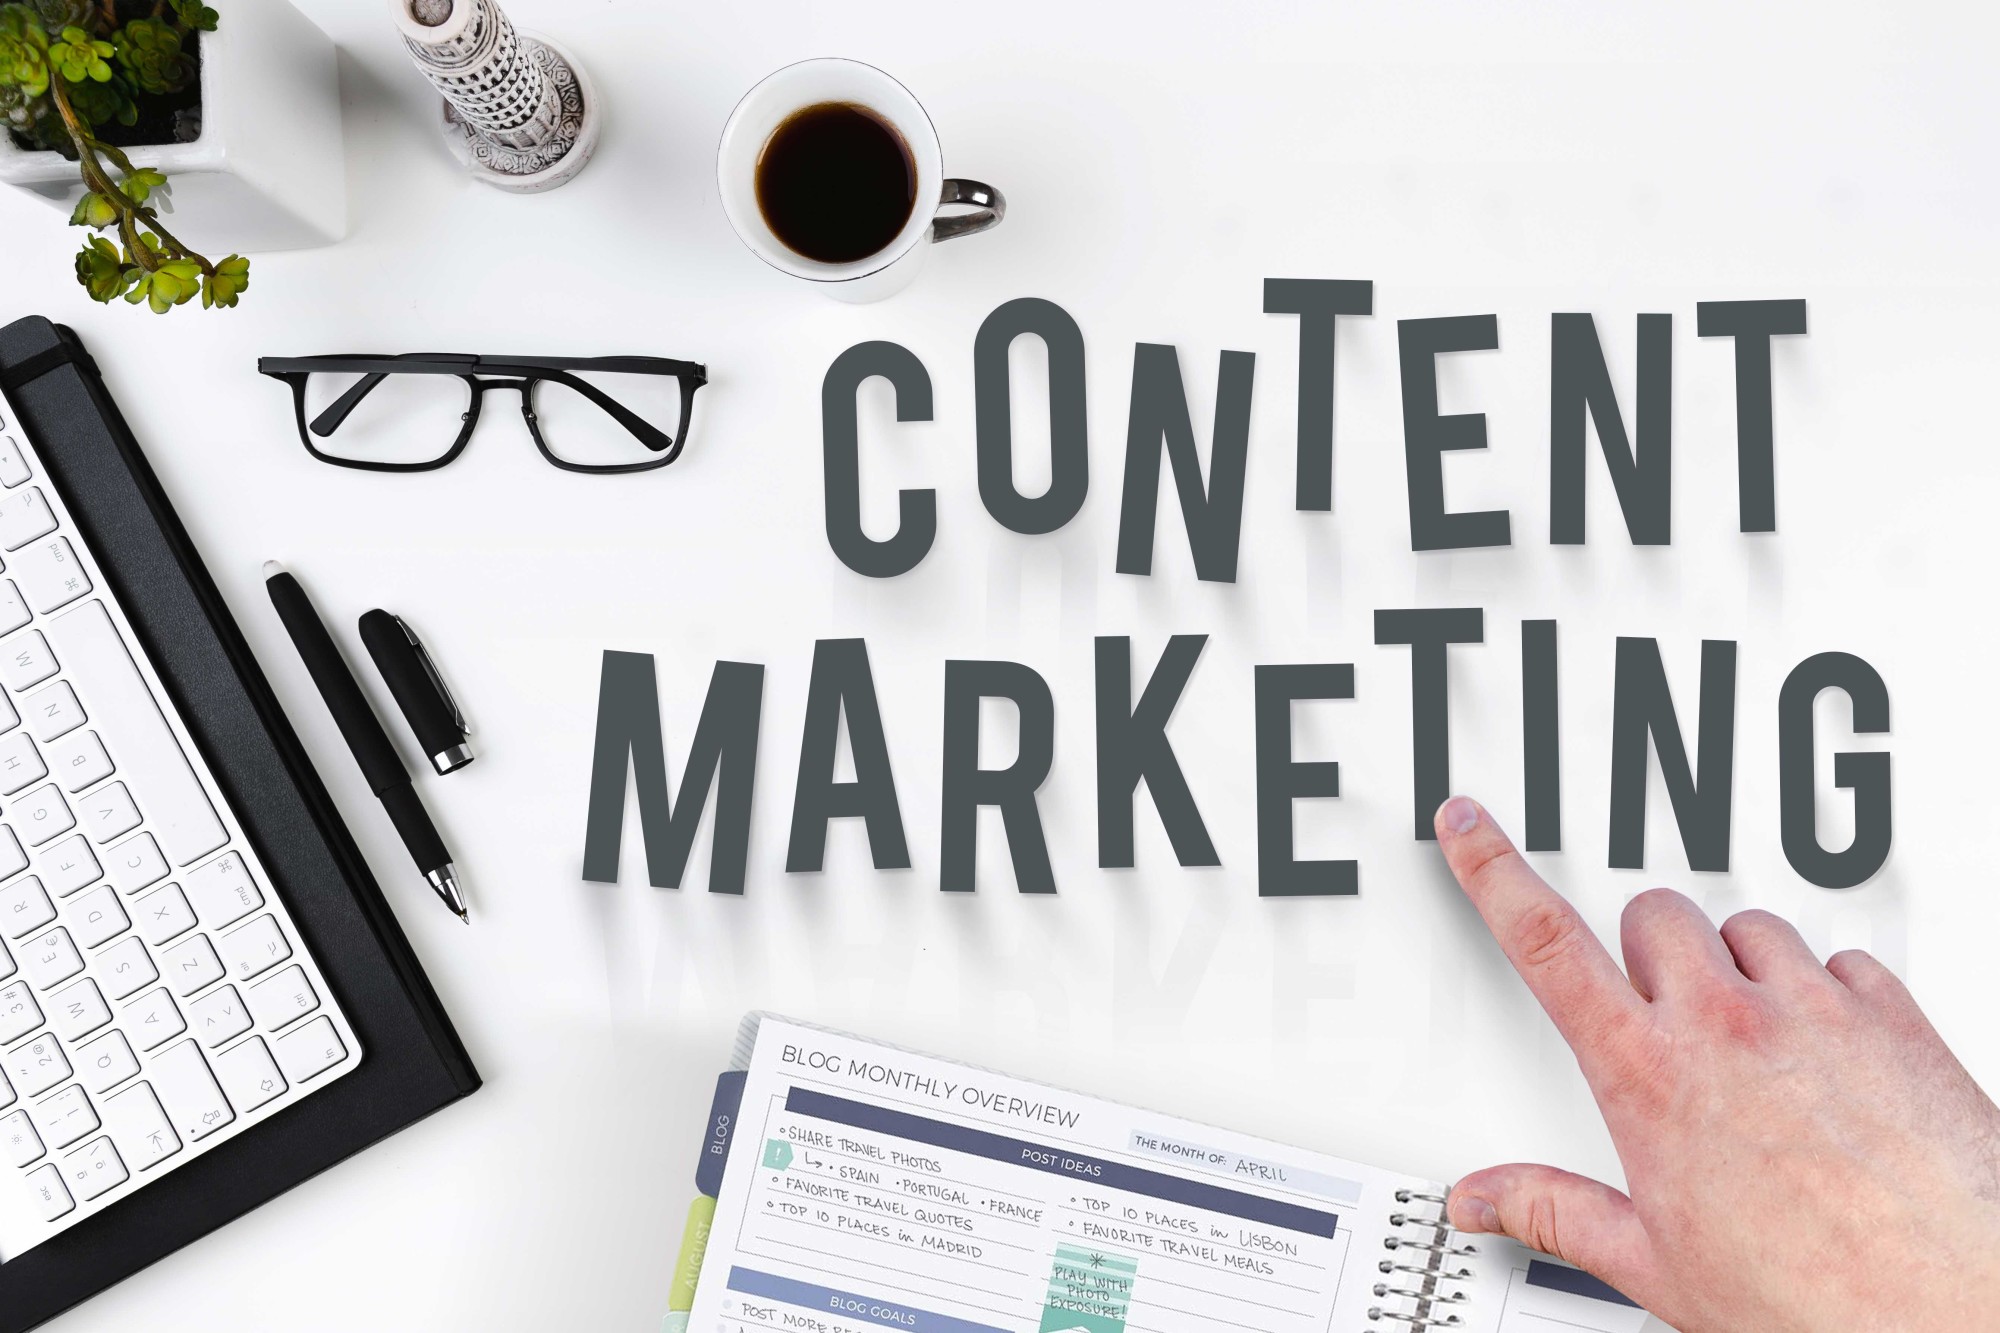 A well planned content marketing campaign can deliver great results for your business. See our top content marketing tips and give your marketing a boost.